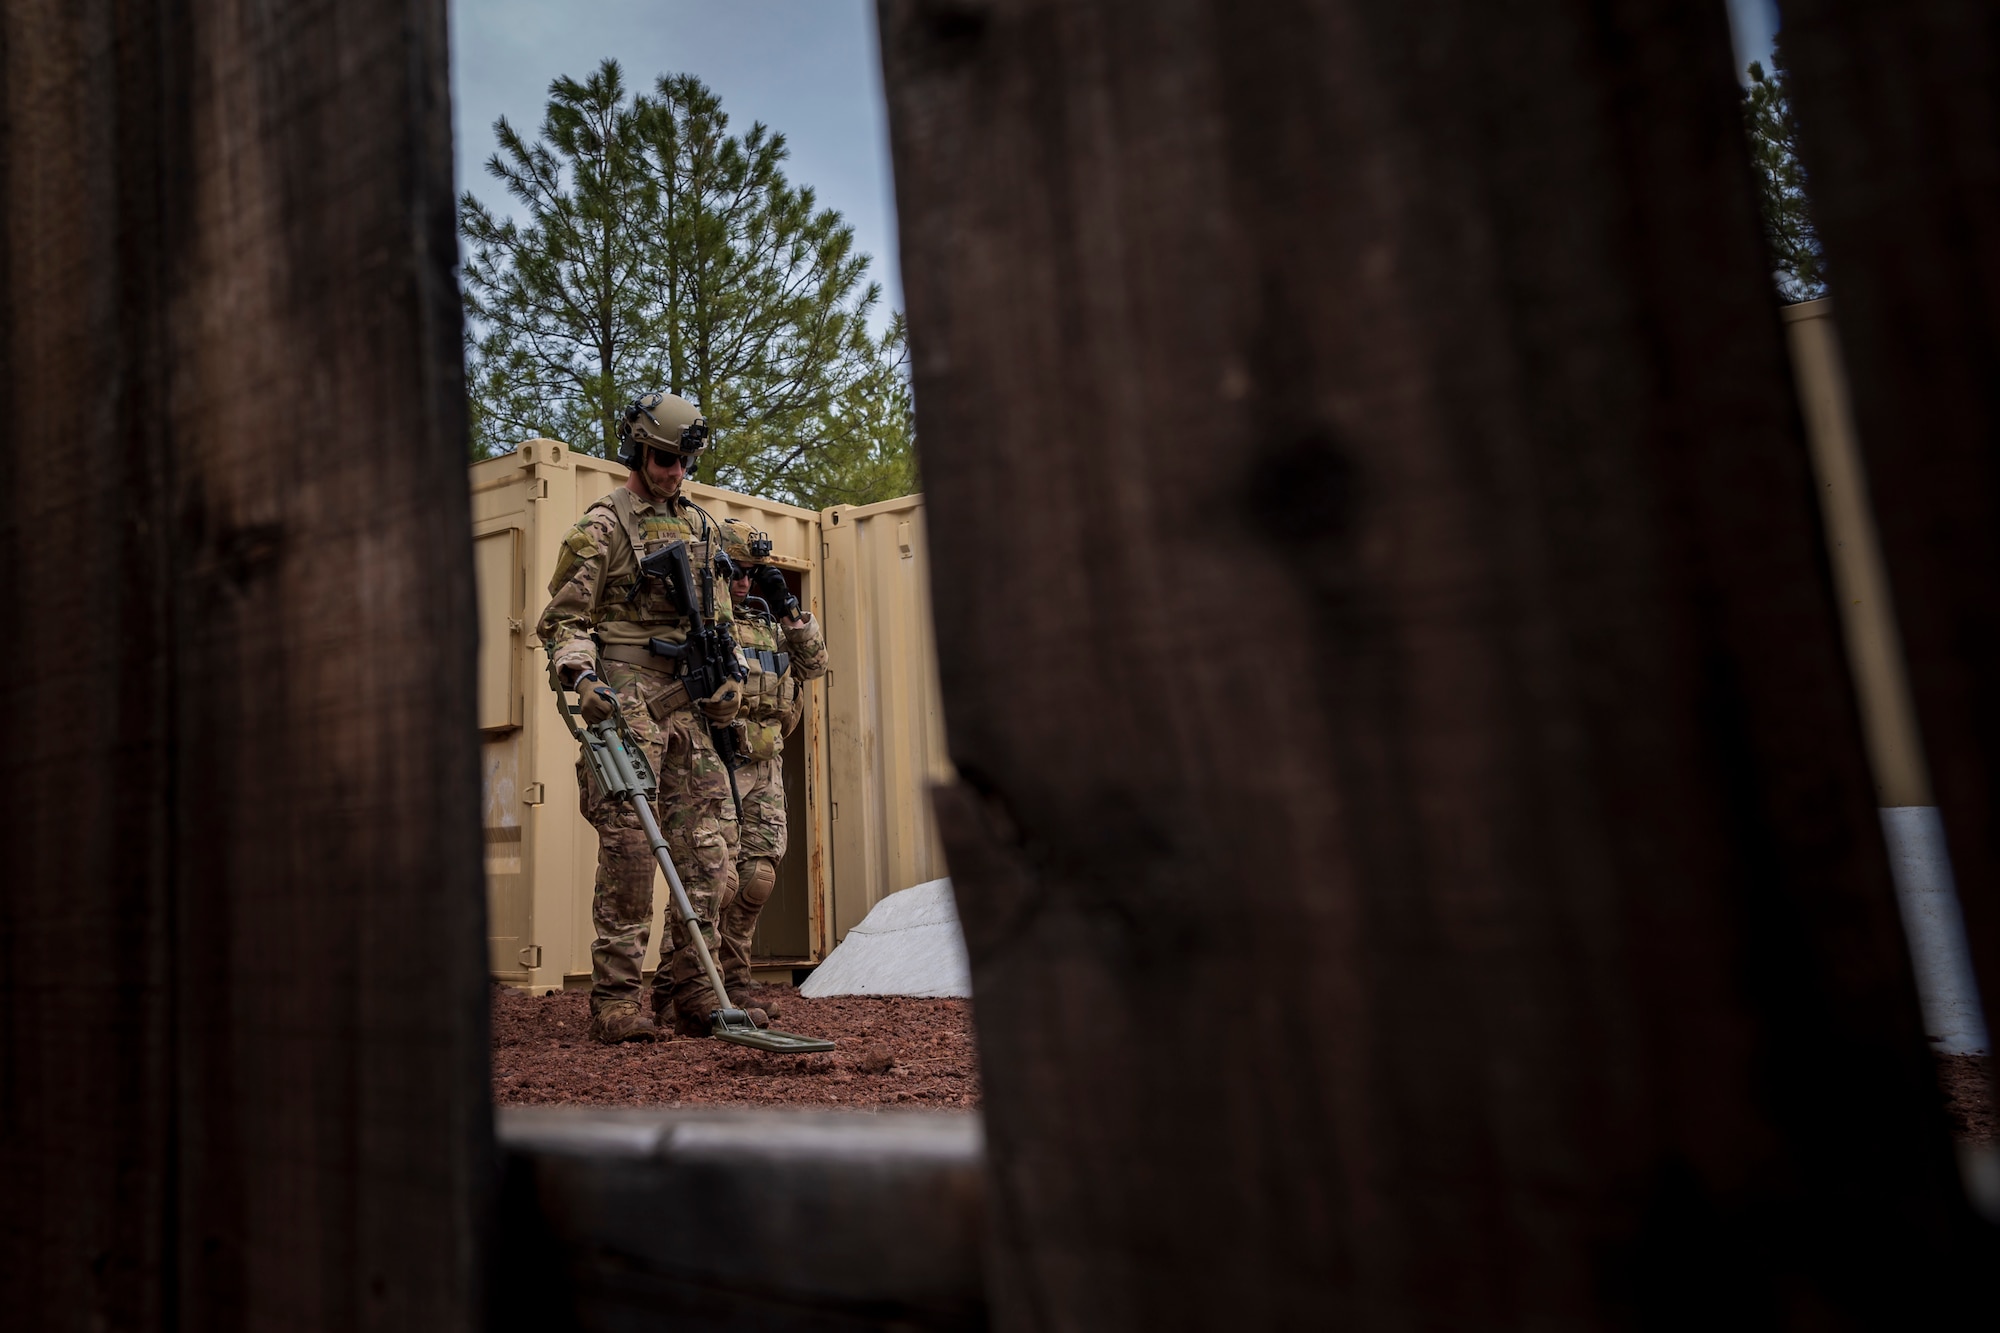 U.S. Air Force Airman 1st Class Jessey Mclain, 56th Civil Engineer Squadron Explosive Ordnance Disposal flight technician, sweeps for unexploded ordnance inside a mock village during a training scenario at Camp Navajo, Arizona, April 12, 2023.